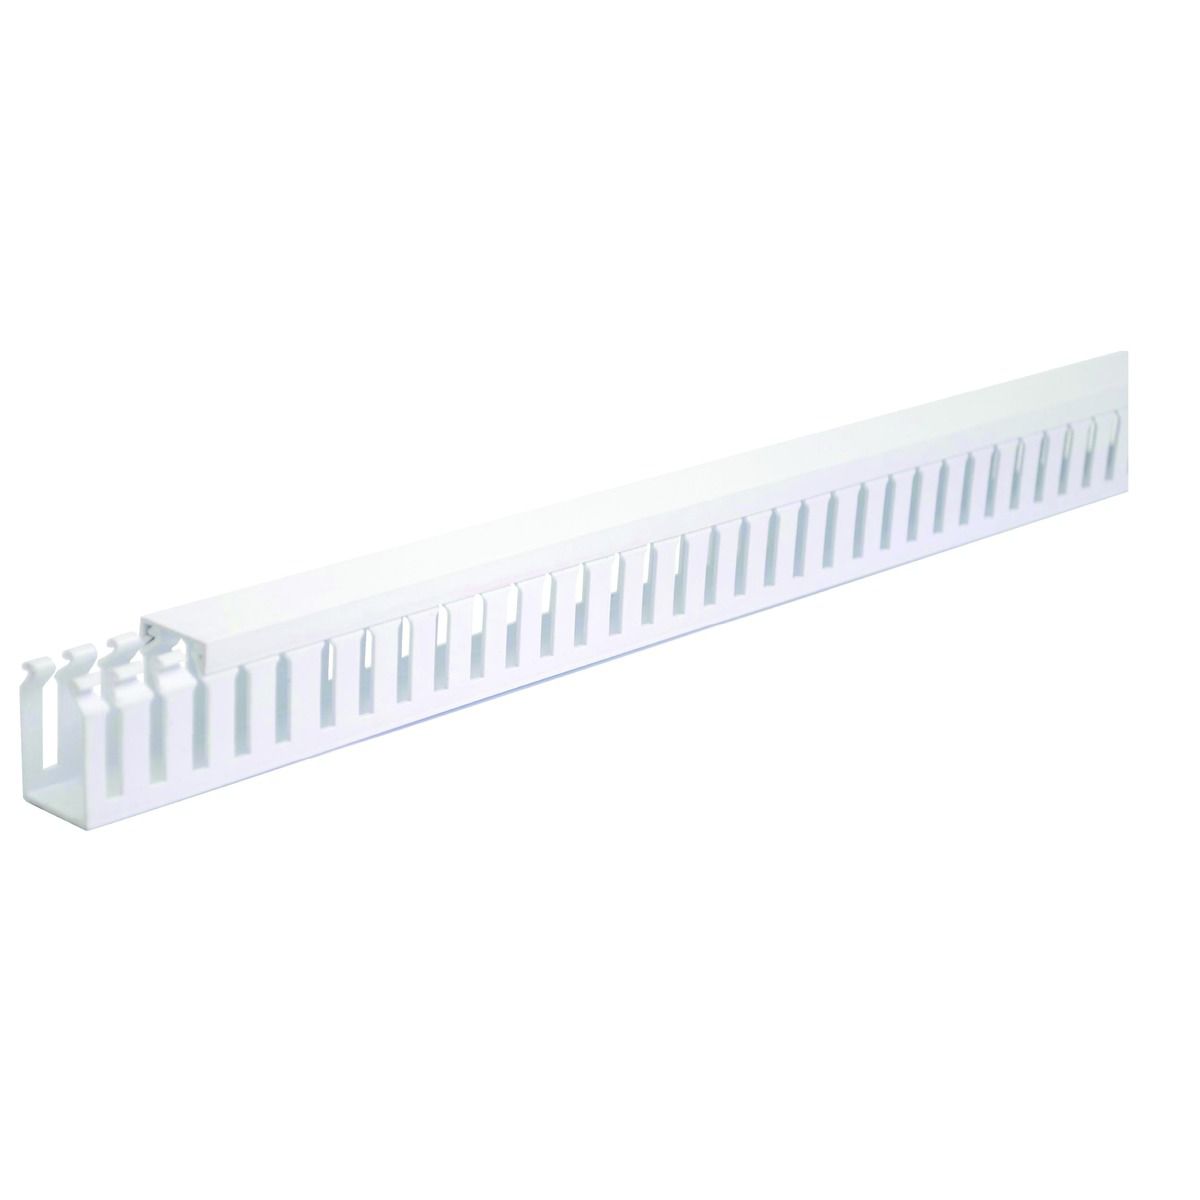 Image of TTE White Self-Adhesive Slotted Trunking - 38 x 25 x 2000mm